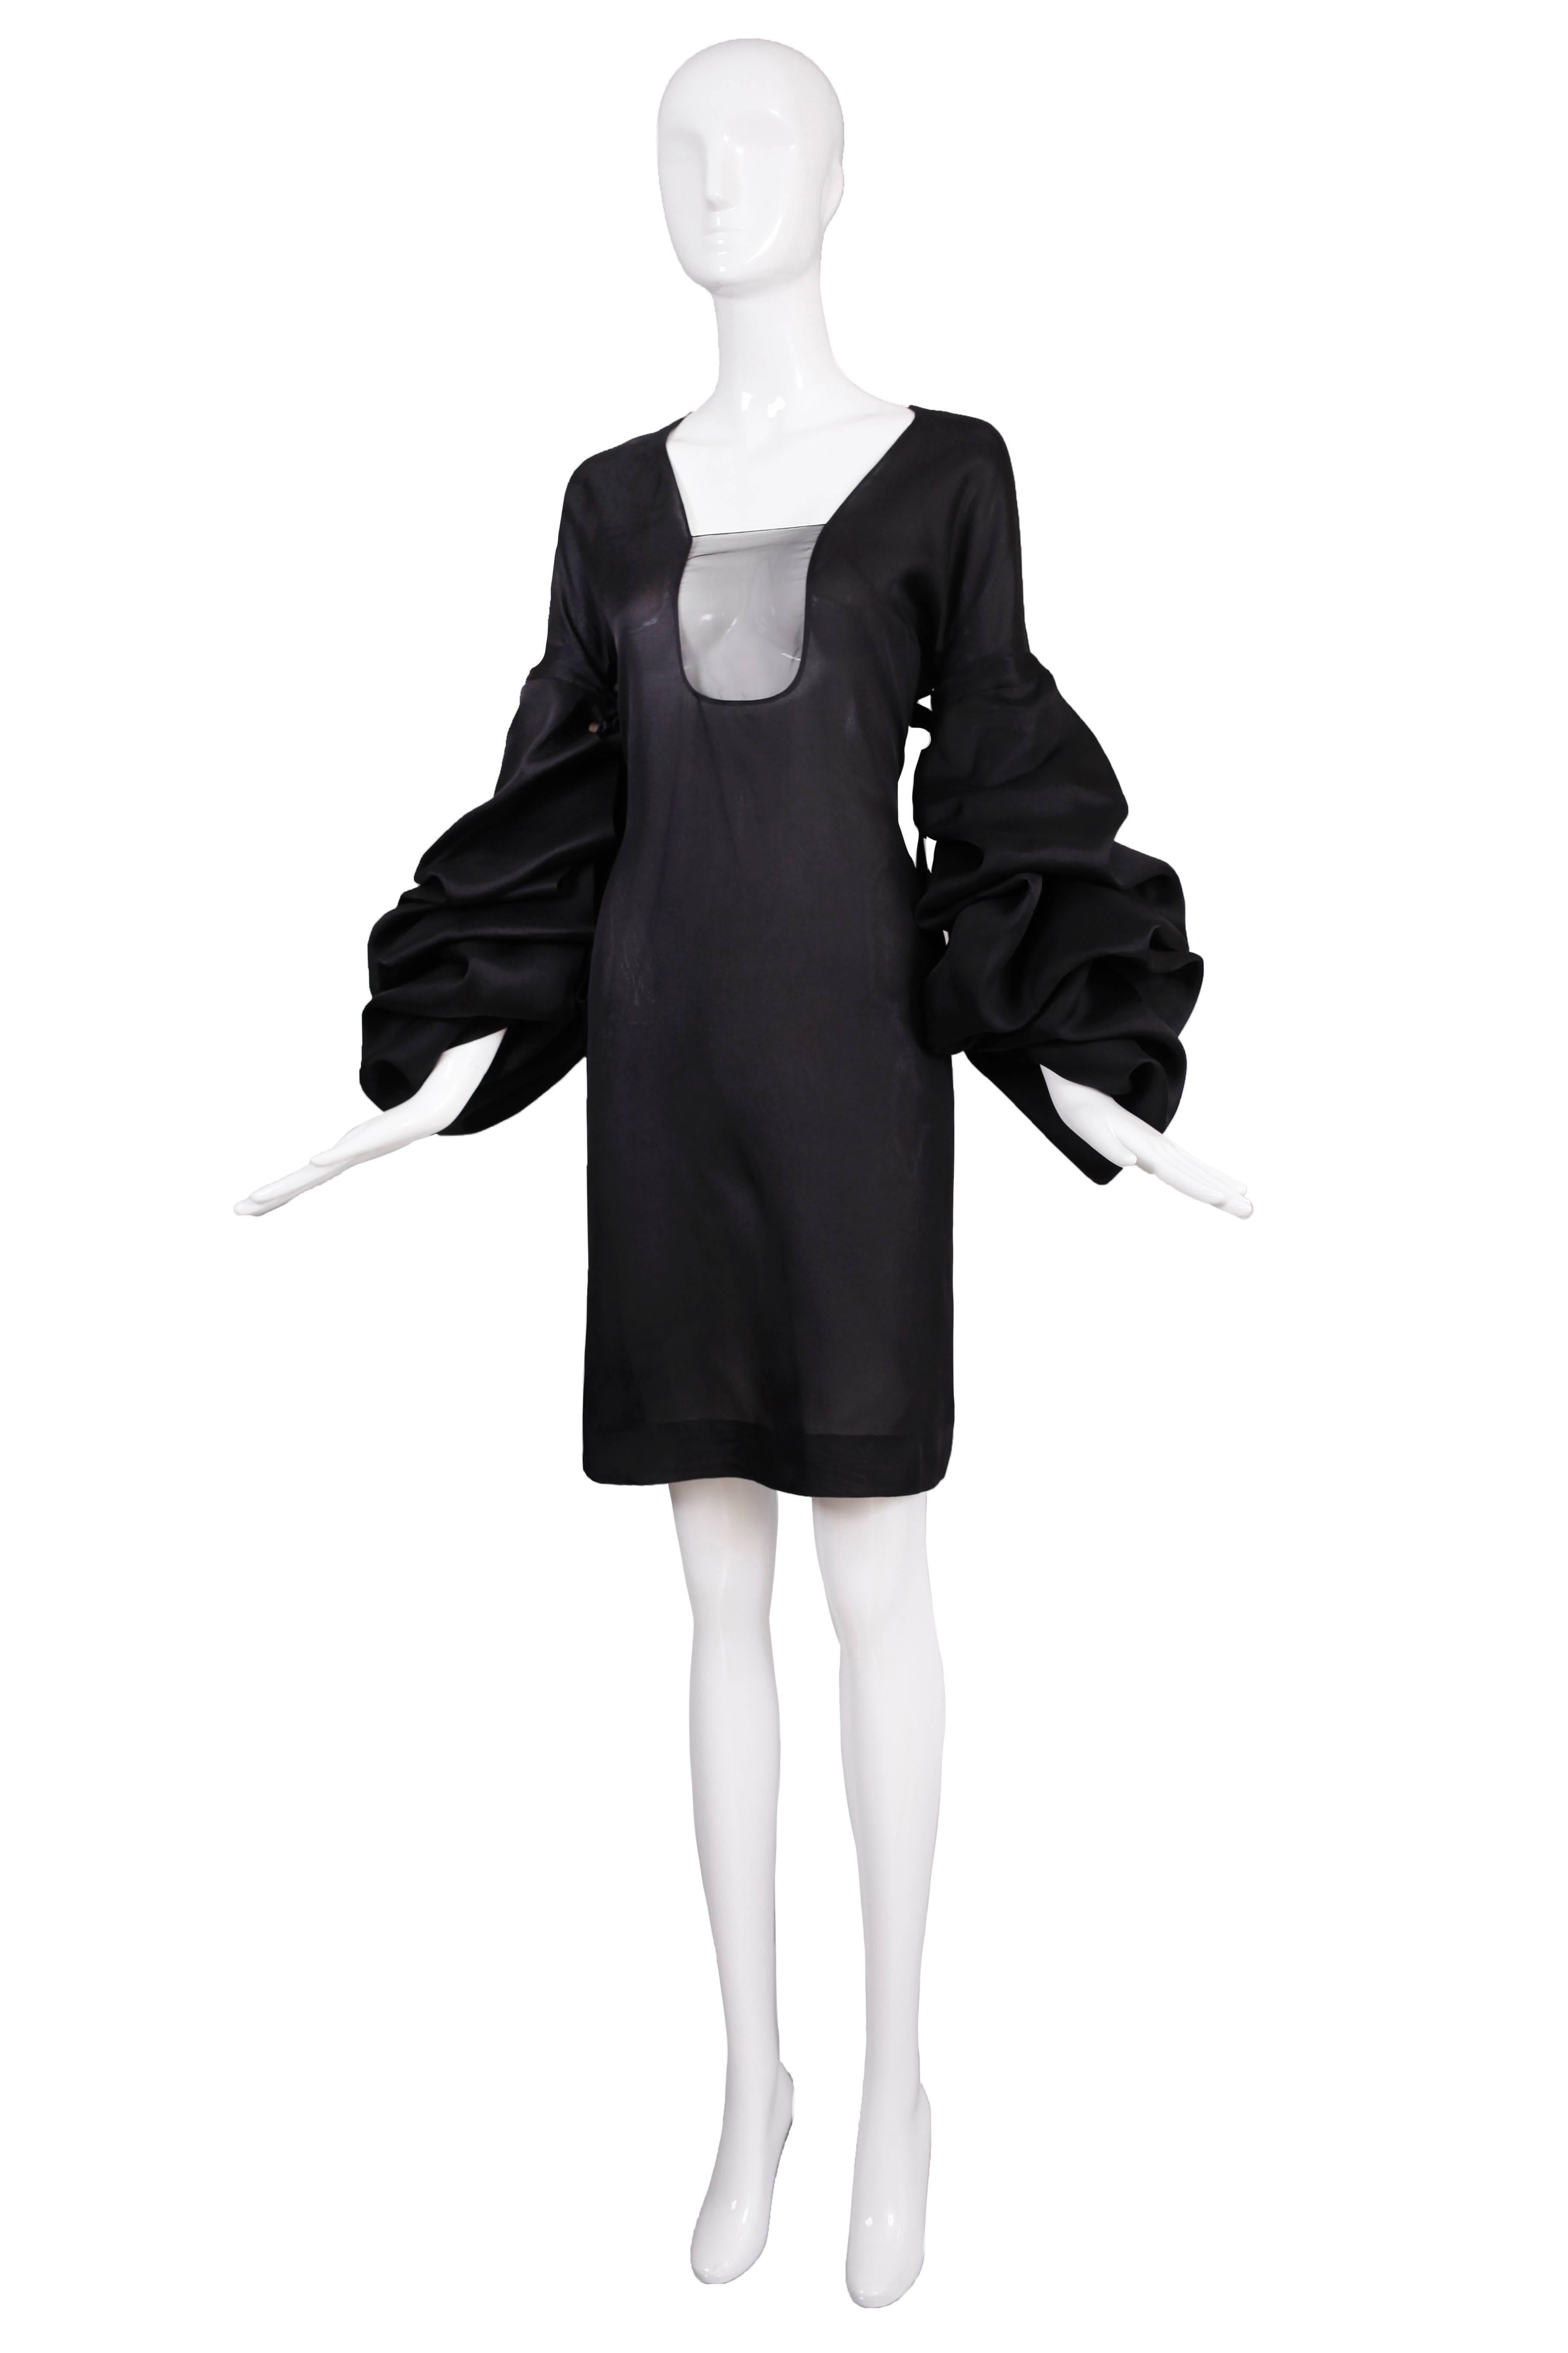 Iconic 2002 A/H Tom Ford for Yves Saint Laurent black silk cocktail dress with triple tier detachable balloon sleeves. This dress was look #34 on the runway and modeled by Giselle Bunchden in the Tom Ford book. In excellent condition. Size 40.